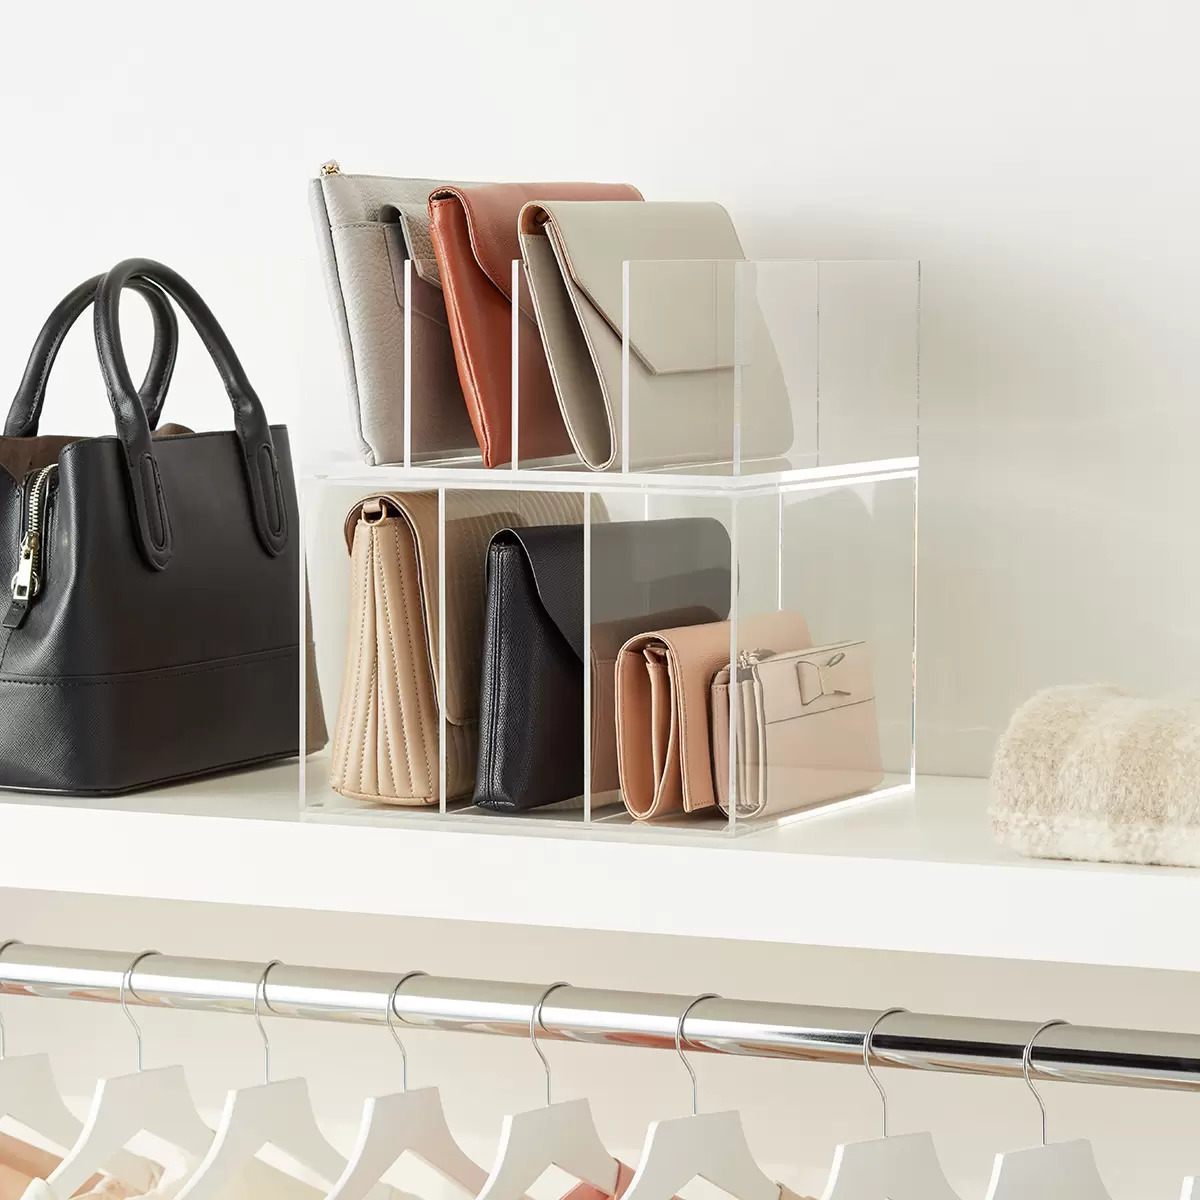 How To Store Purses In Closet